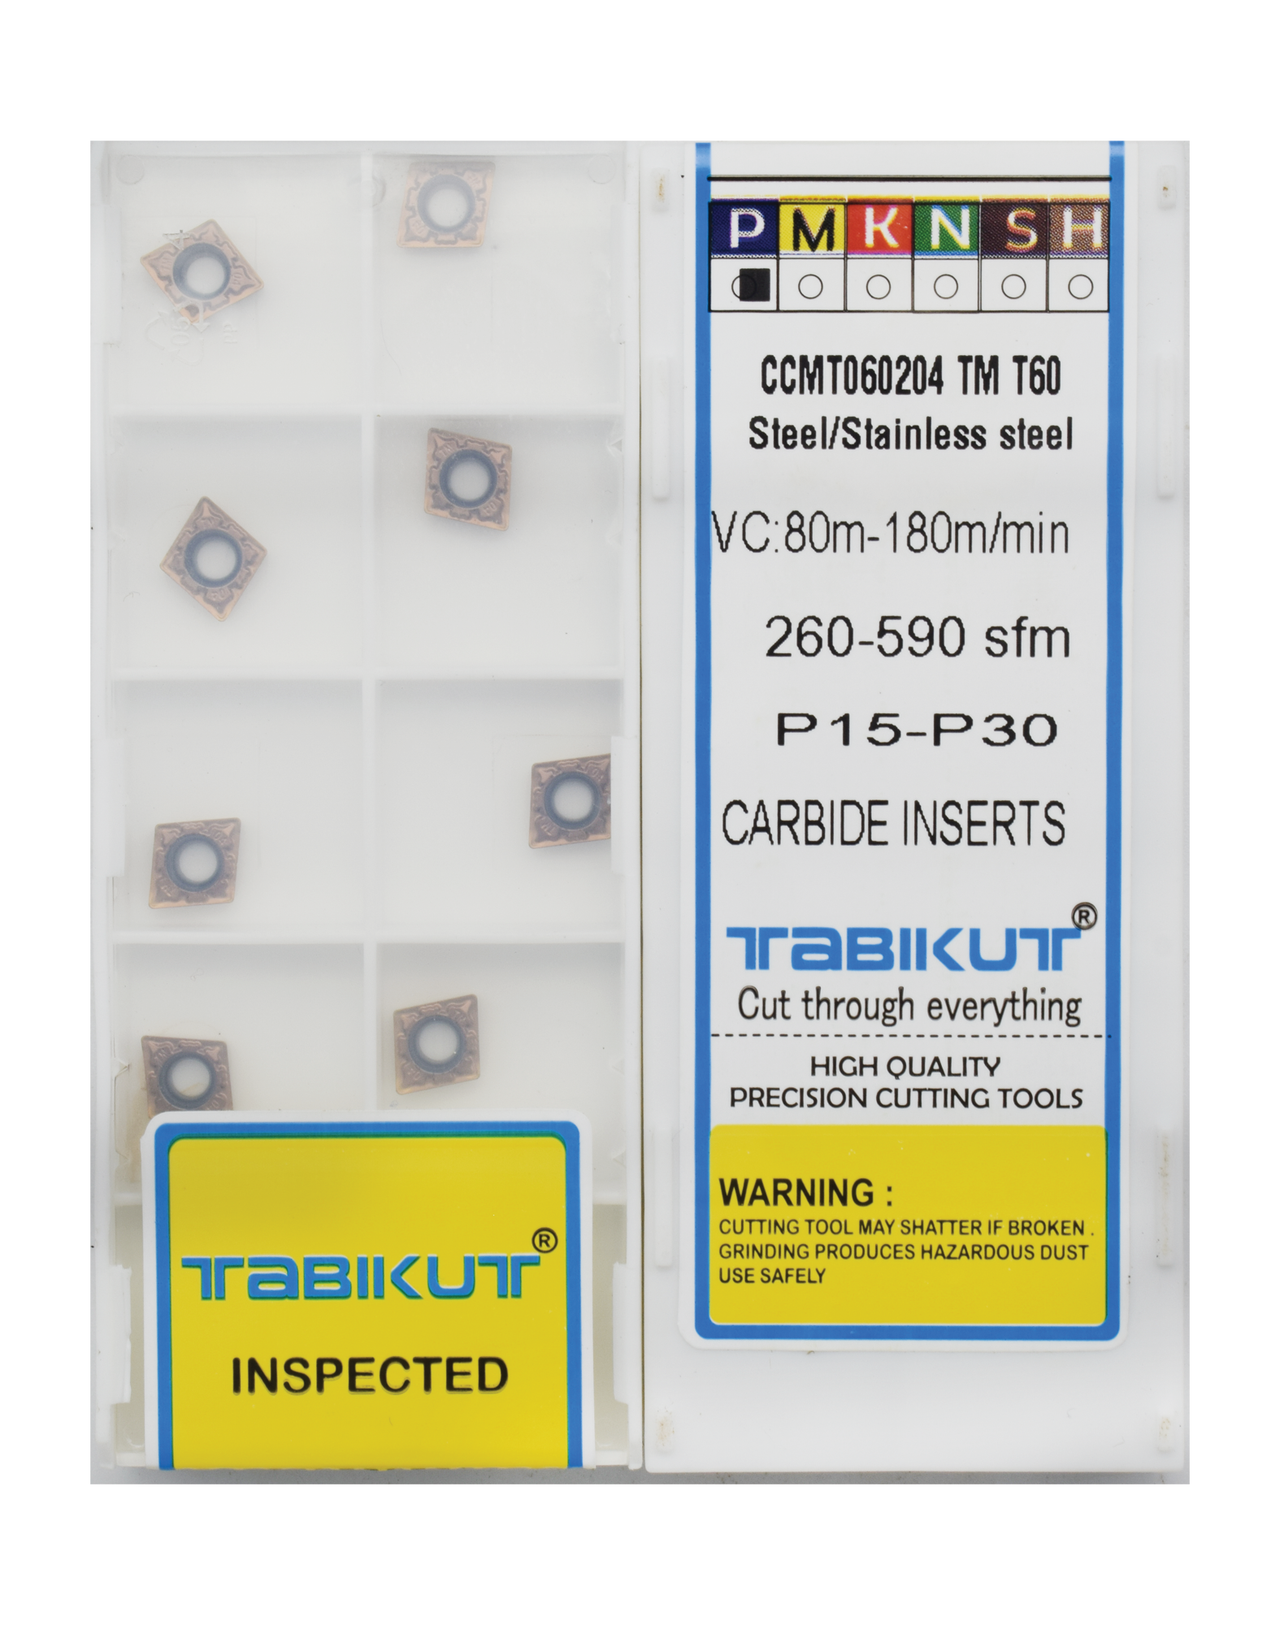 CCMT060204/08 TM T60 Stainless Steel grade pack of 10